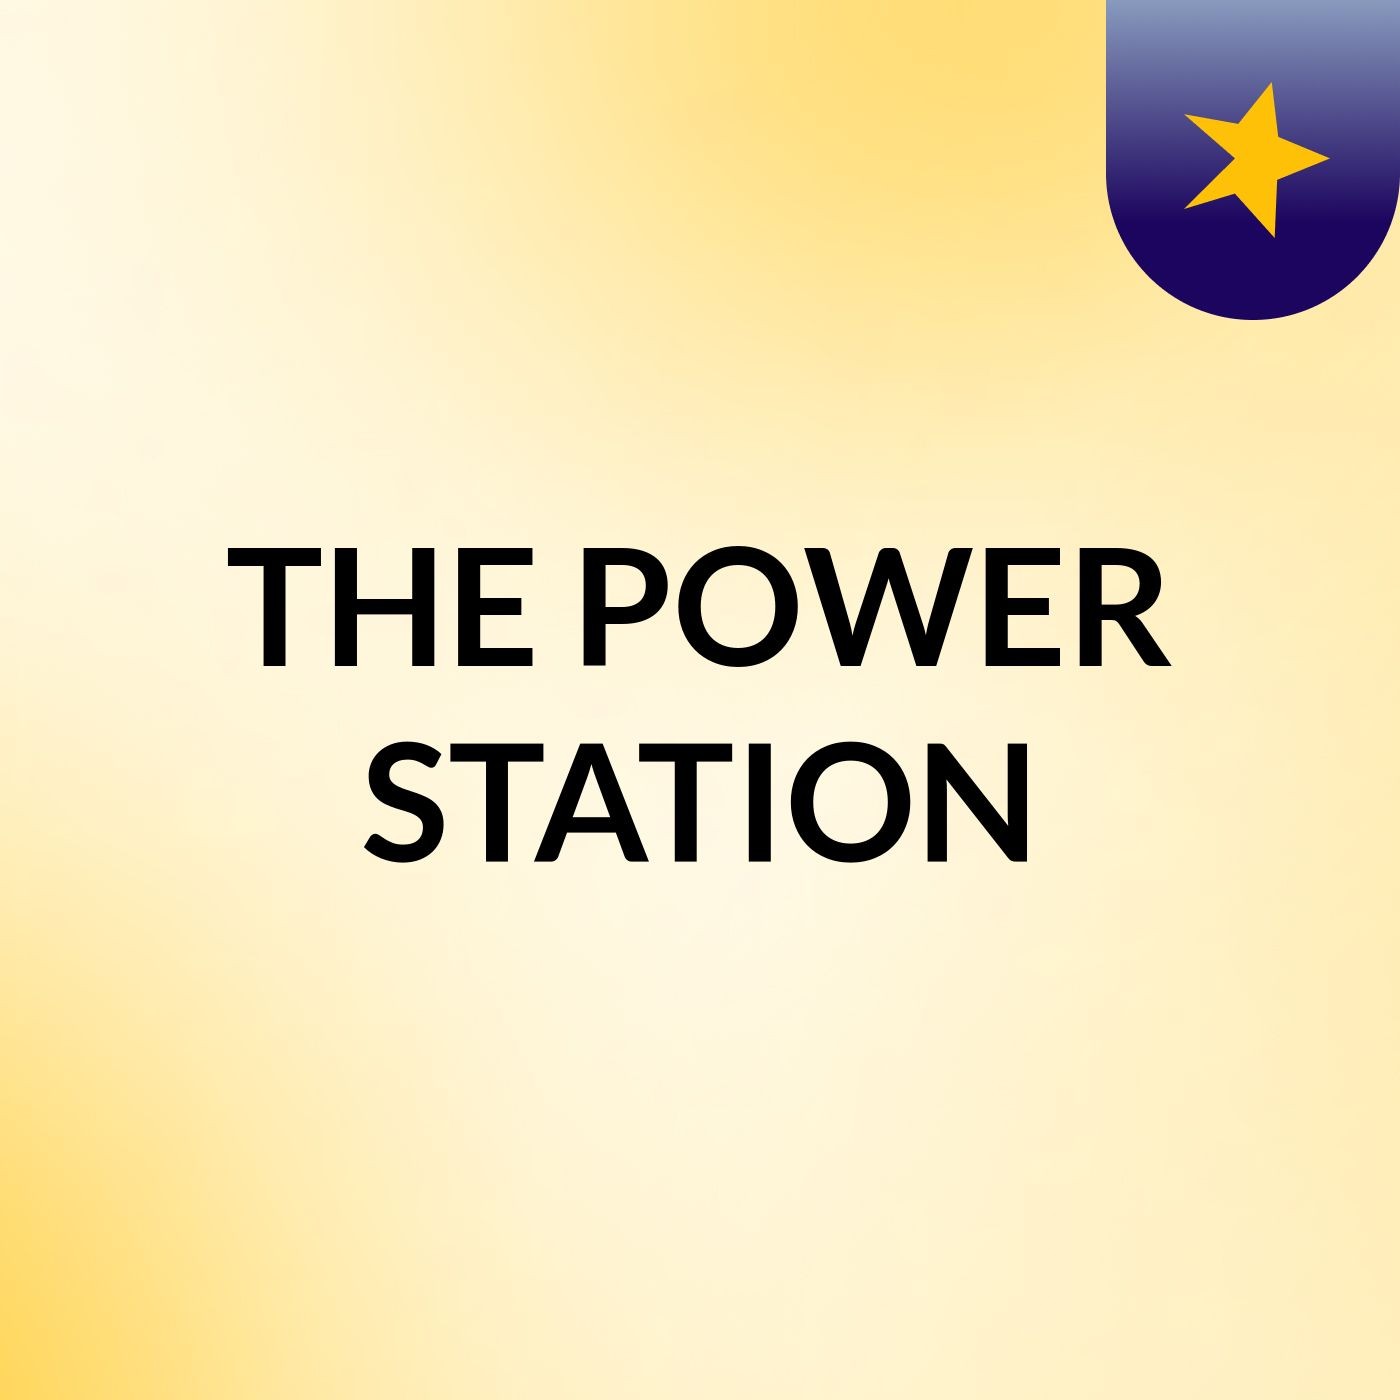 THE POWER STATION